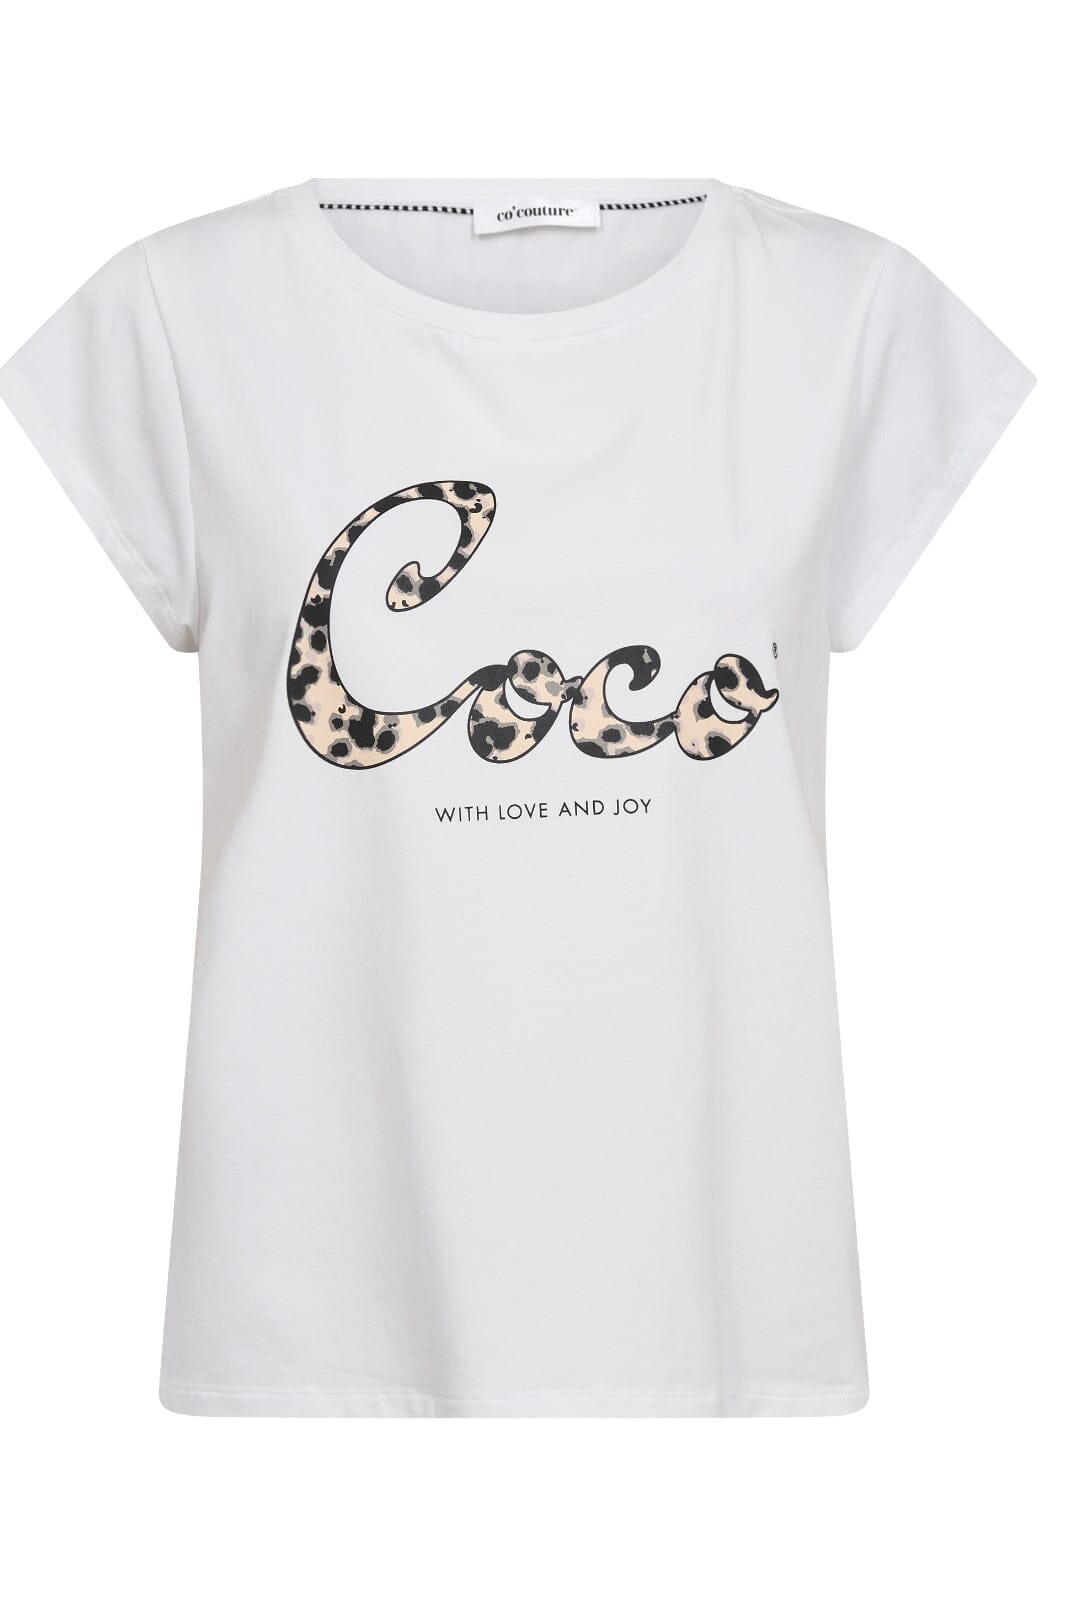 Forudbestilling - Co´couture - Leocc Coco Tee 33119 - 4000 White T-shirts 